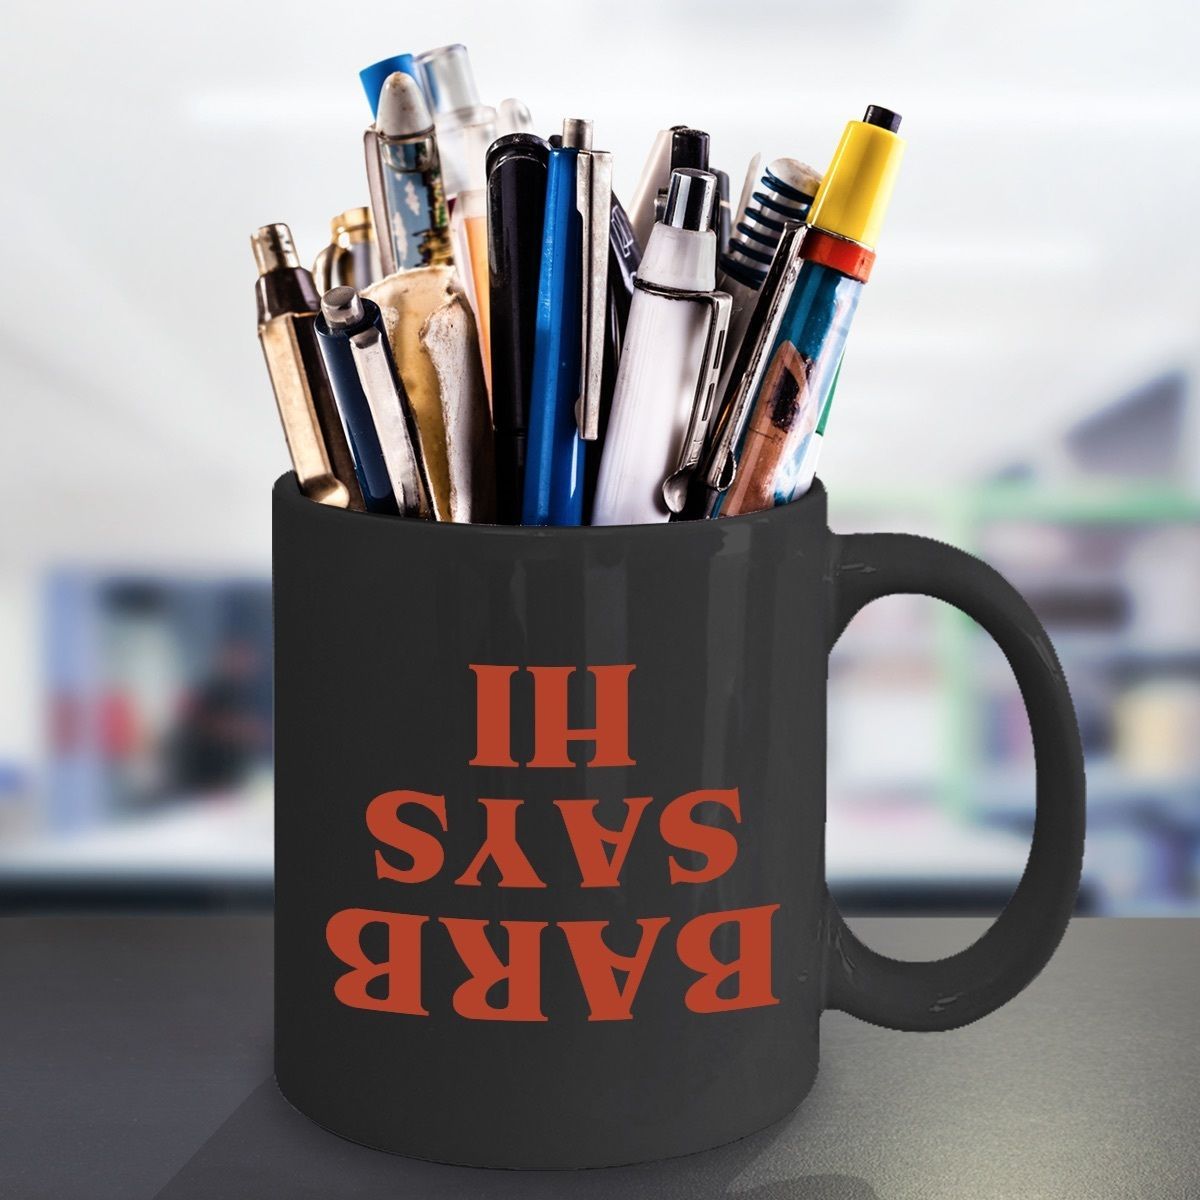 Primary image for Stranger Things Mug - BARB SAYS HI - The Upside Down - TV Show Inspired Fan Gift